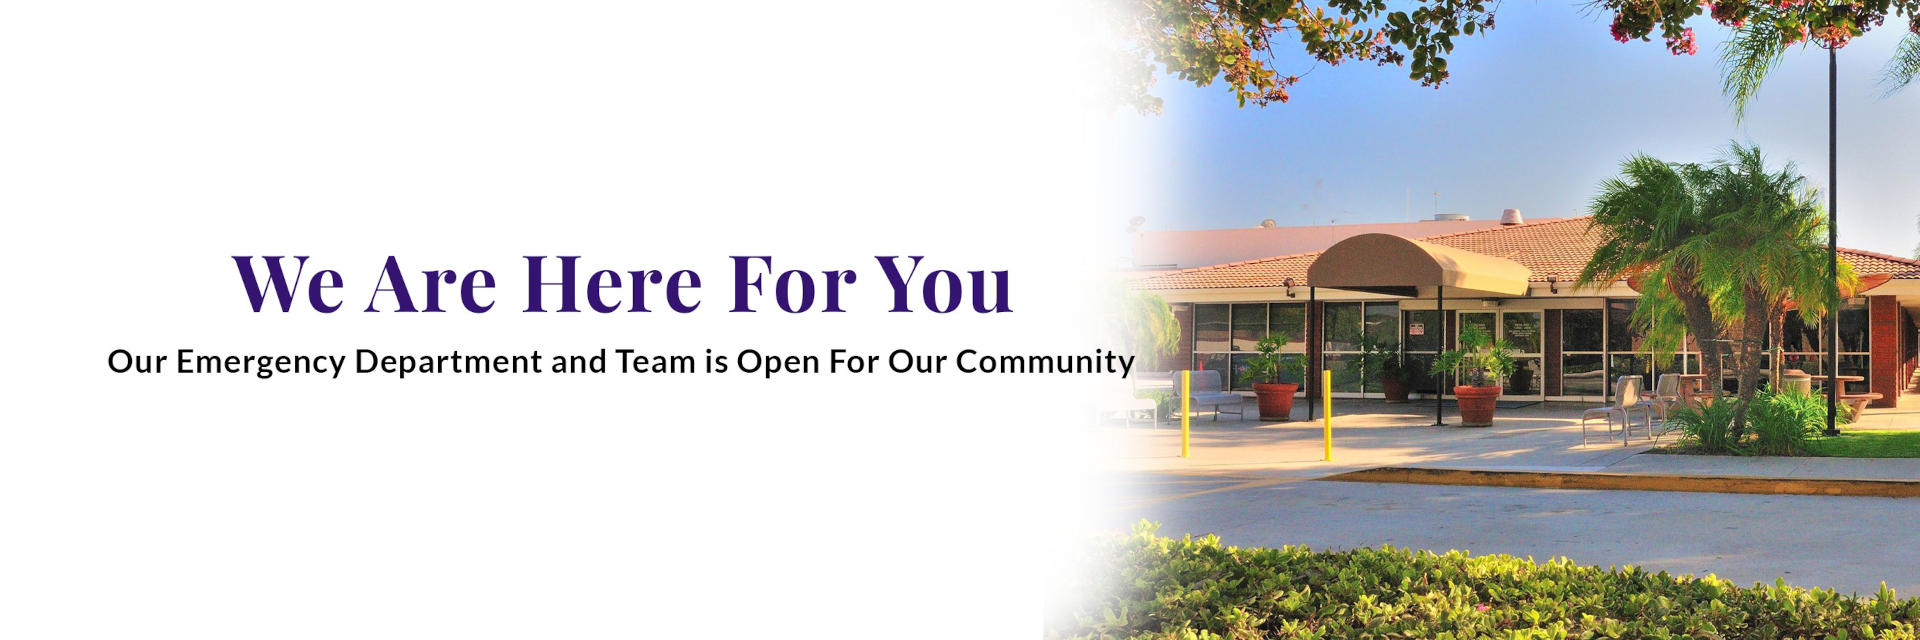 You Are Here For You
Our Emergency Department and Team is Open For Our Community.